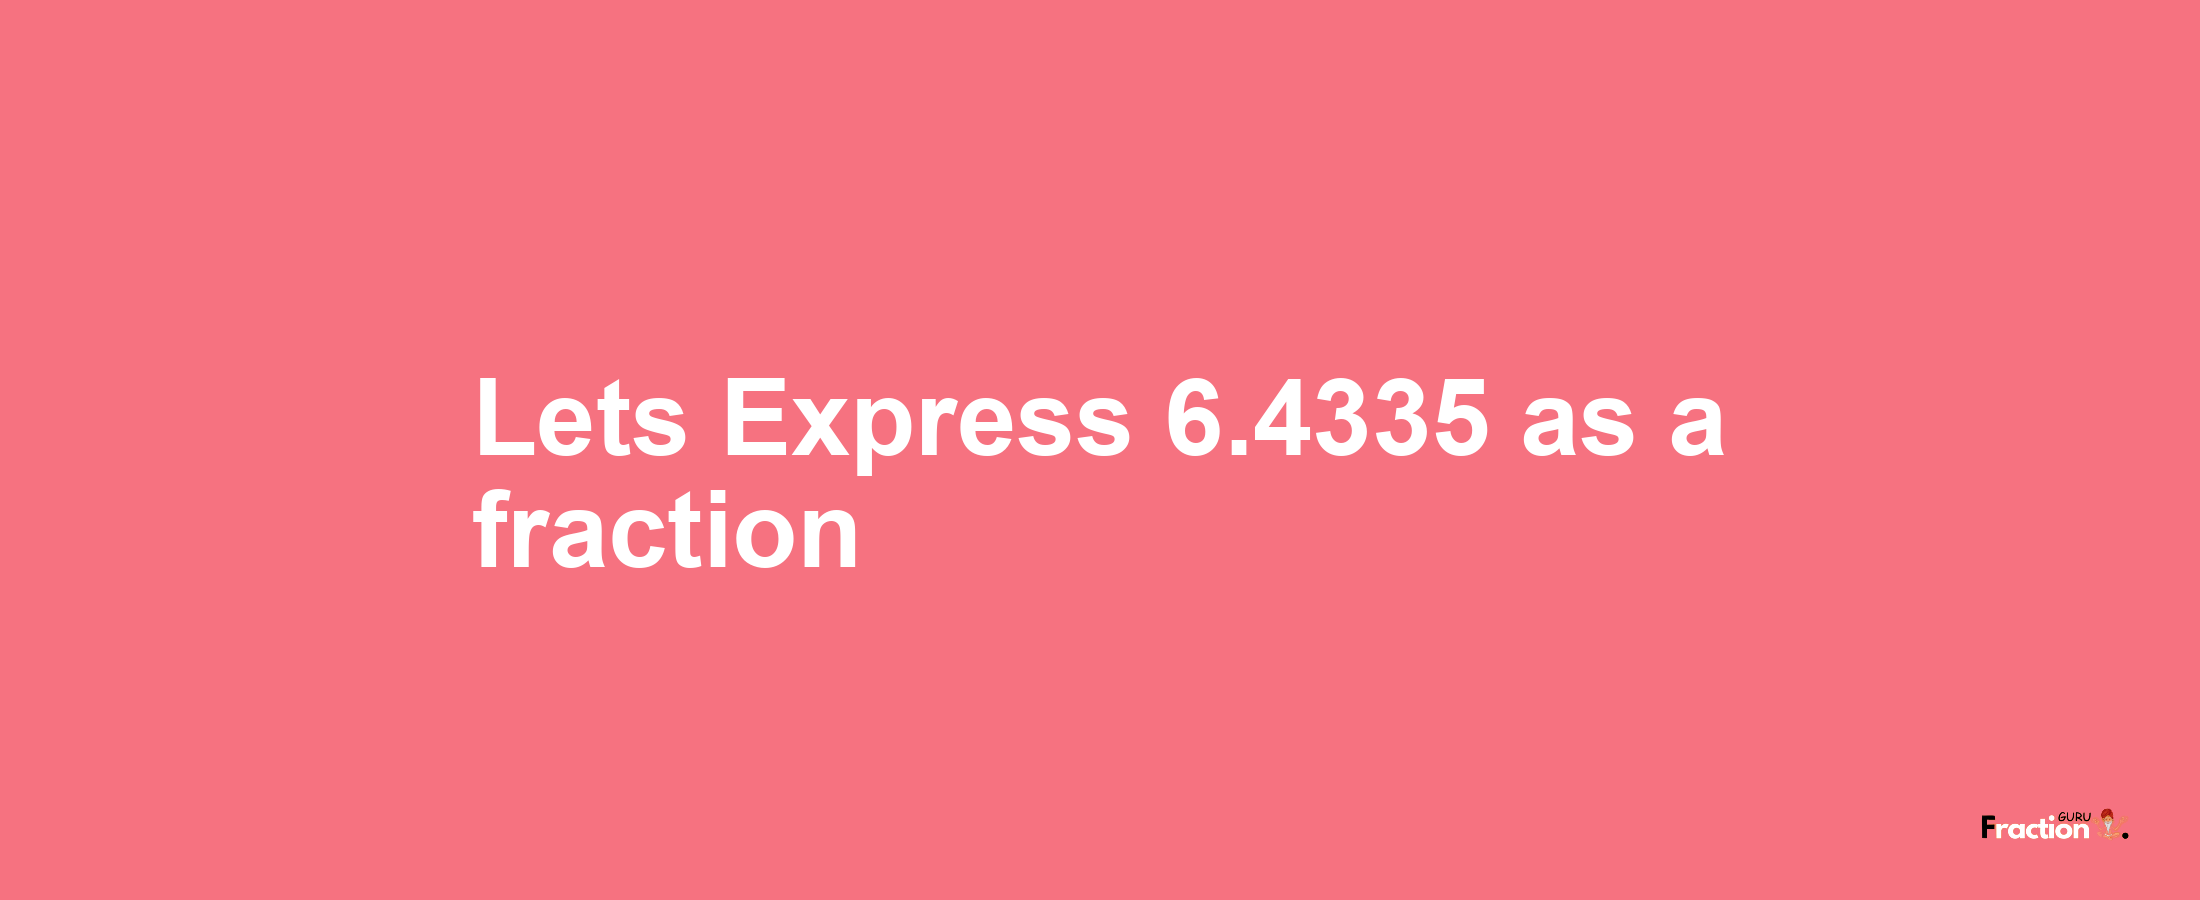 Lets Express 6.4335 as afraction